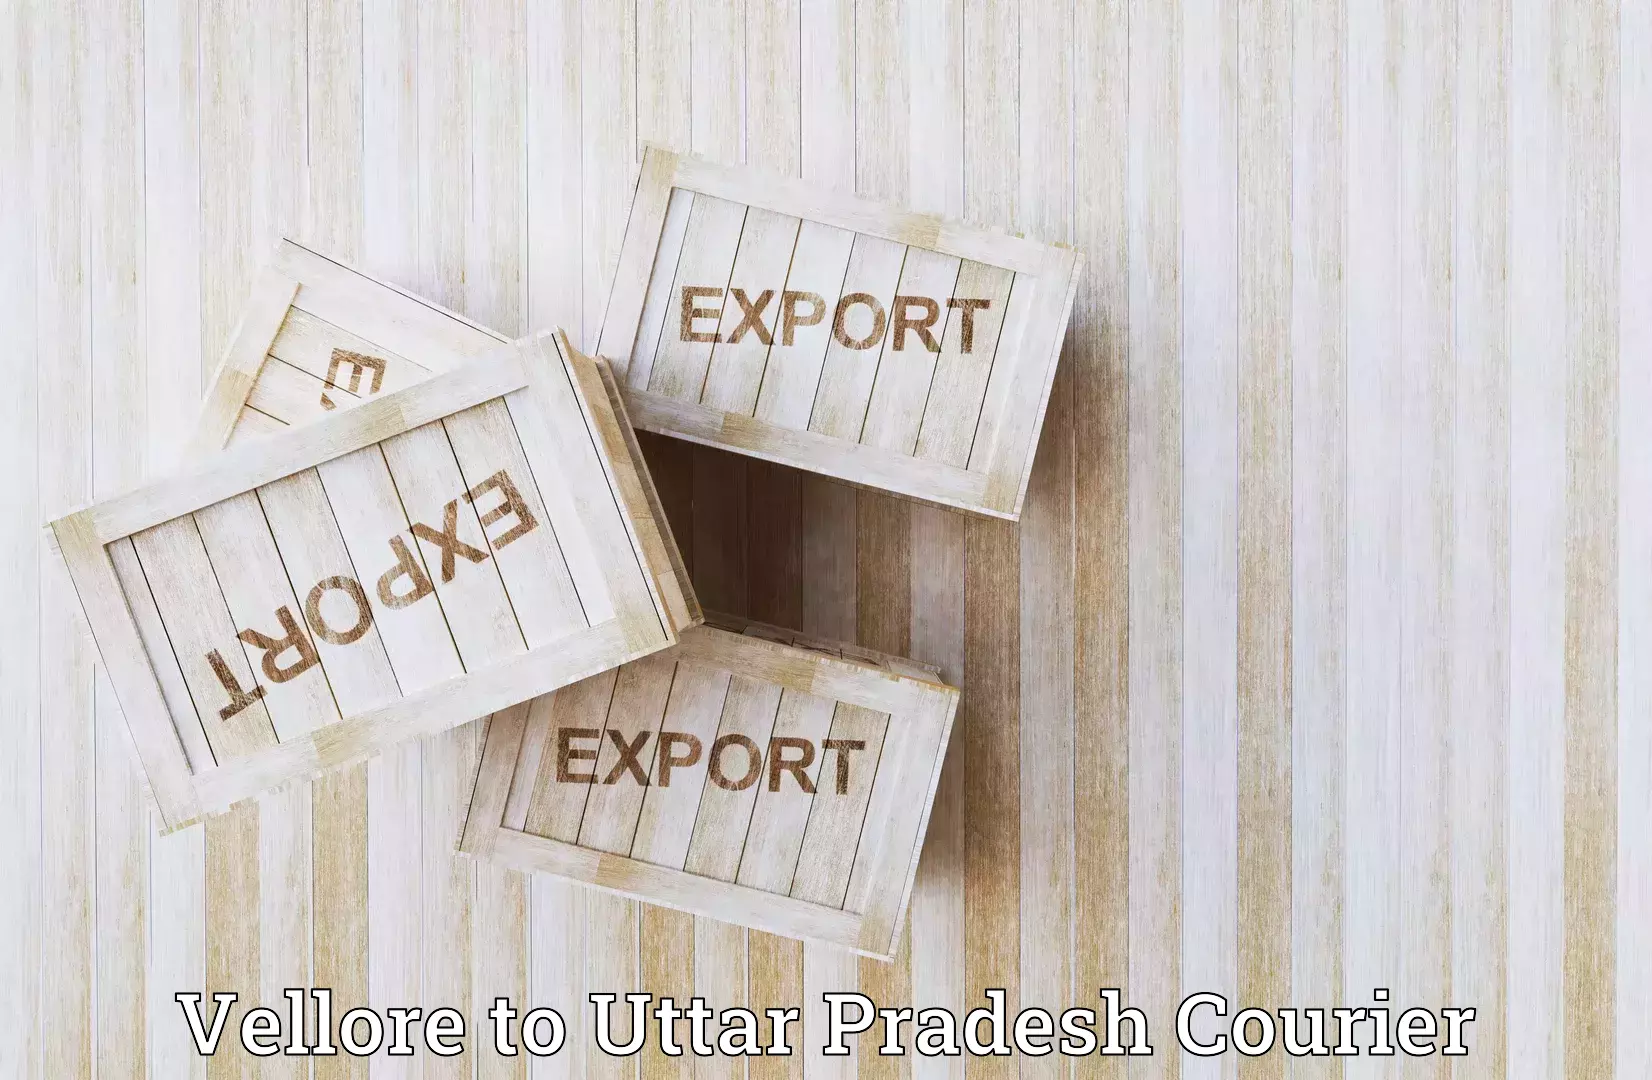 On-call courier service Vellore to Kushinagar